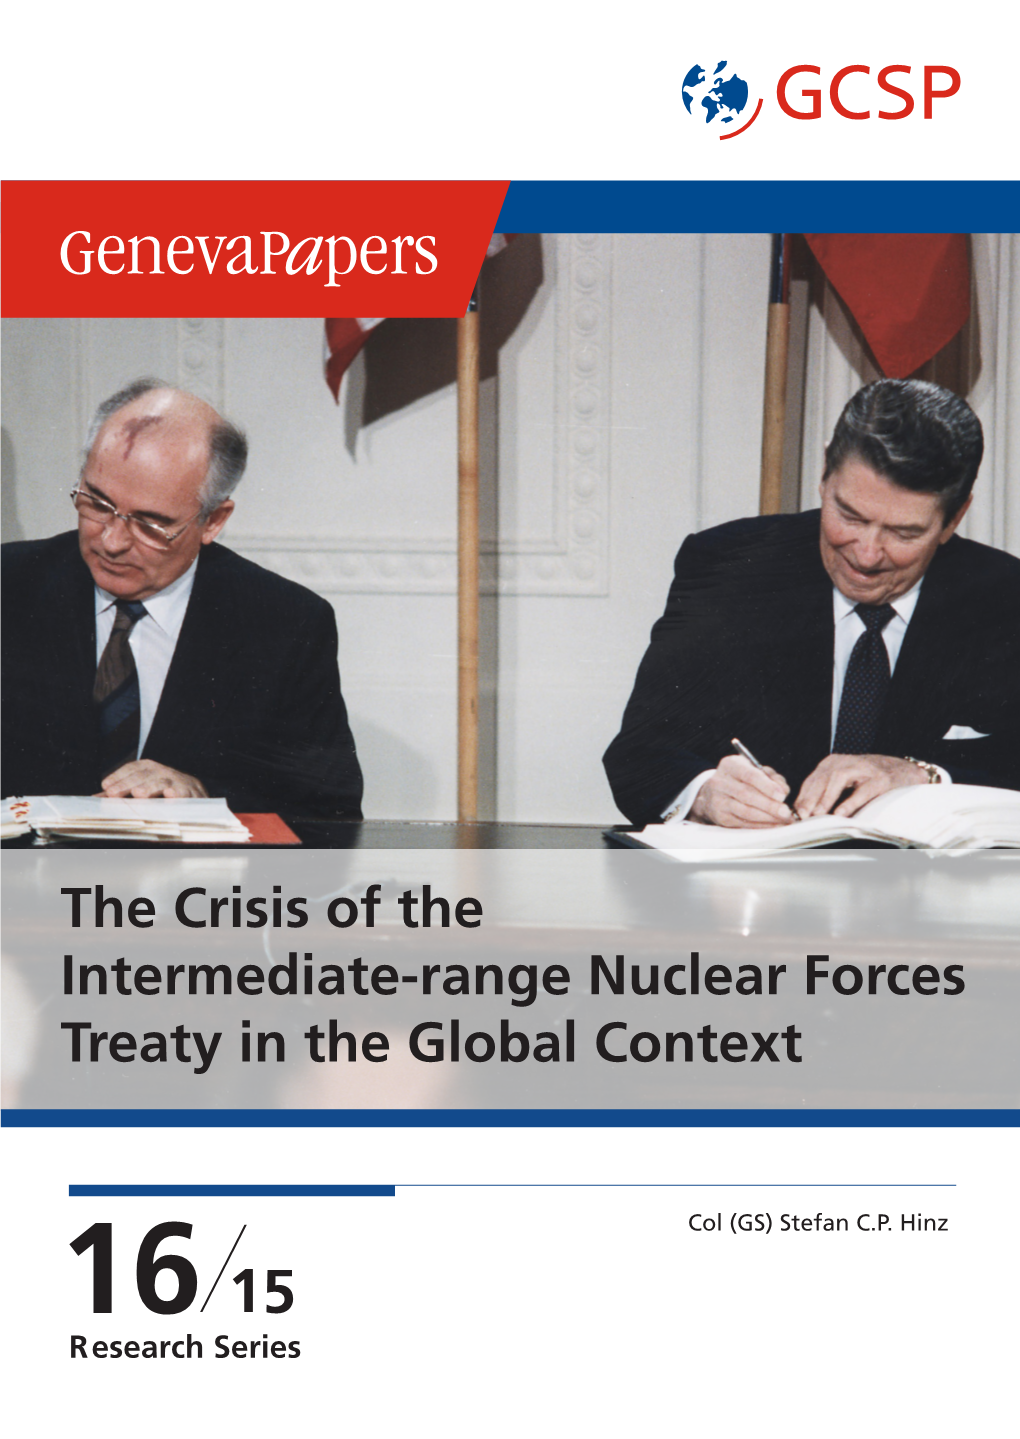 The Crisis of the Intermediate-Range Nuclear Forces Treaty in the Global Context